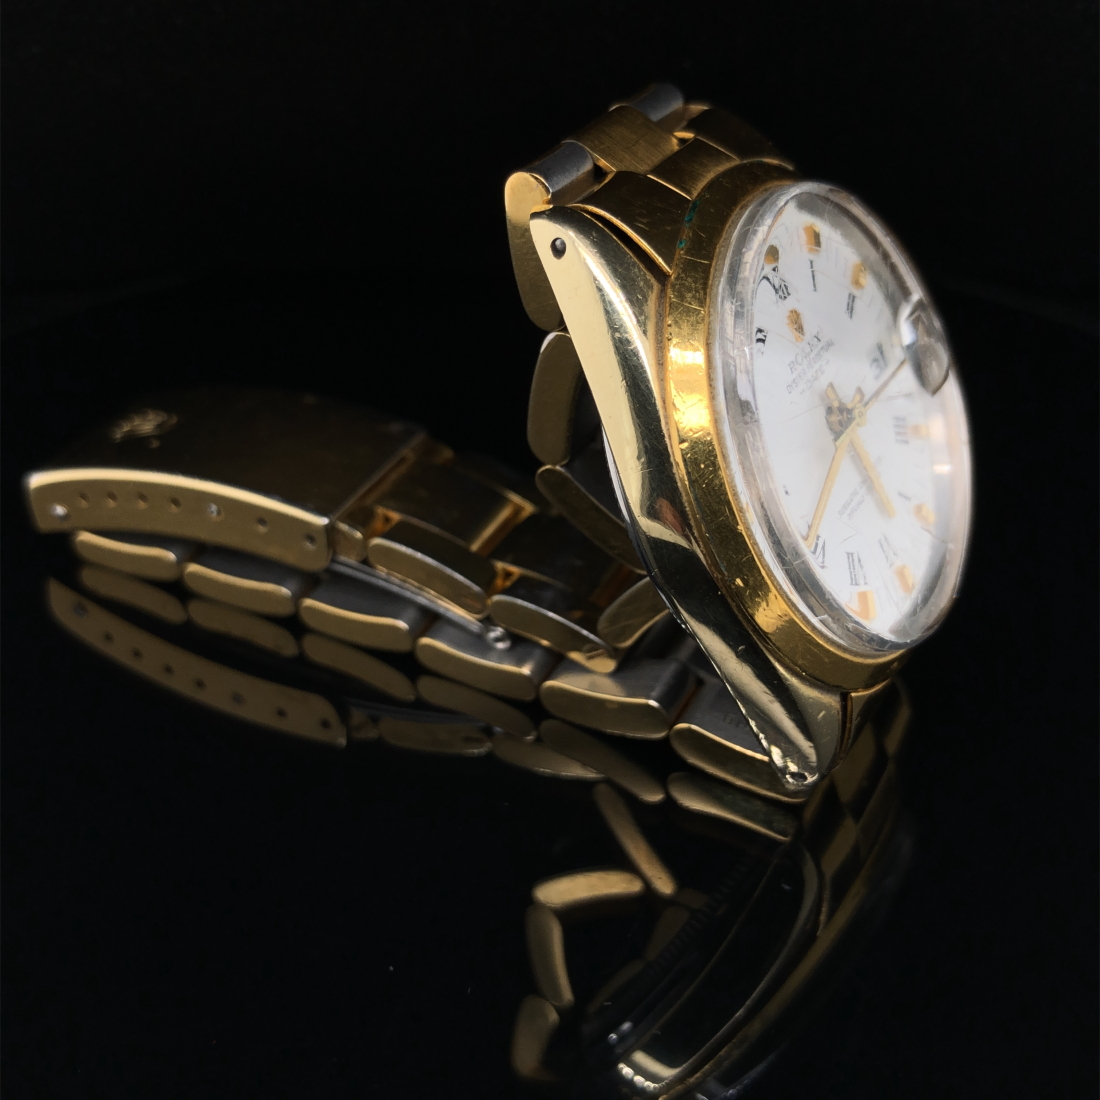 A VINTAGE ROLEX OYSTER PERPETUAL DATE WATCH ON A STAINLESS STEEL AND GOLD PLATED BRACELET STRAP, - Image 7 of 7